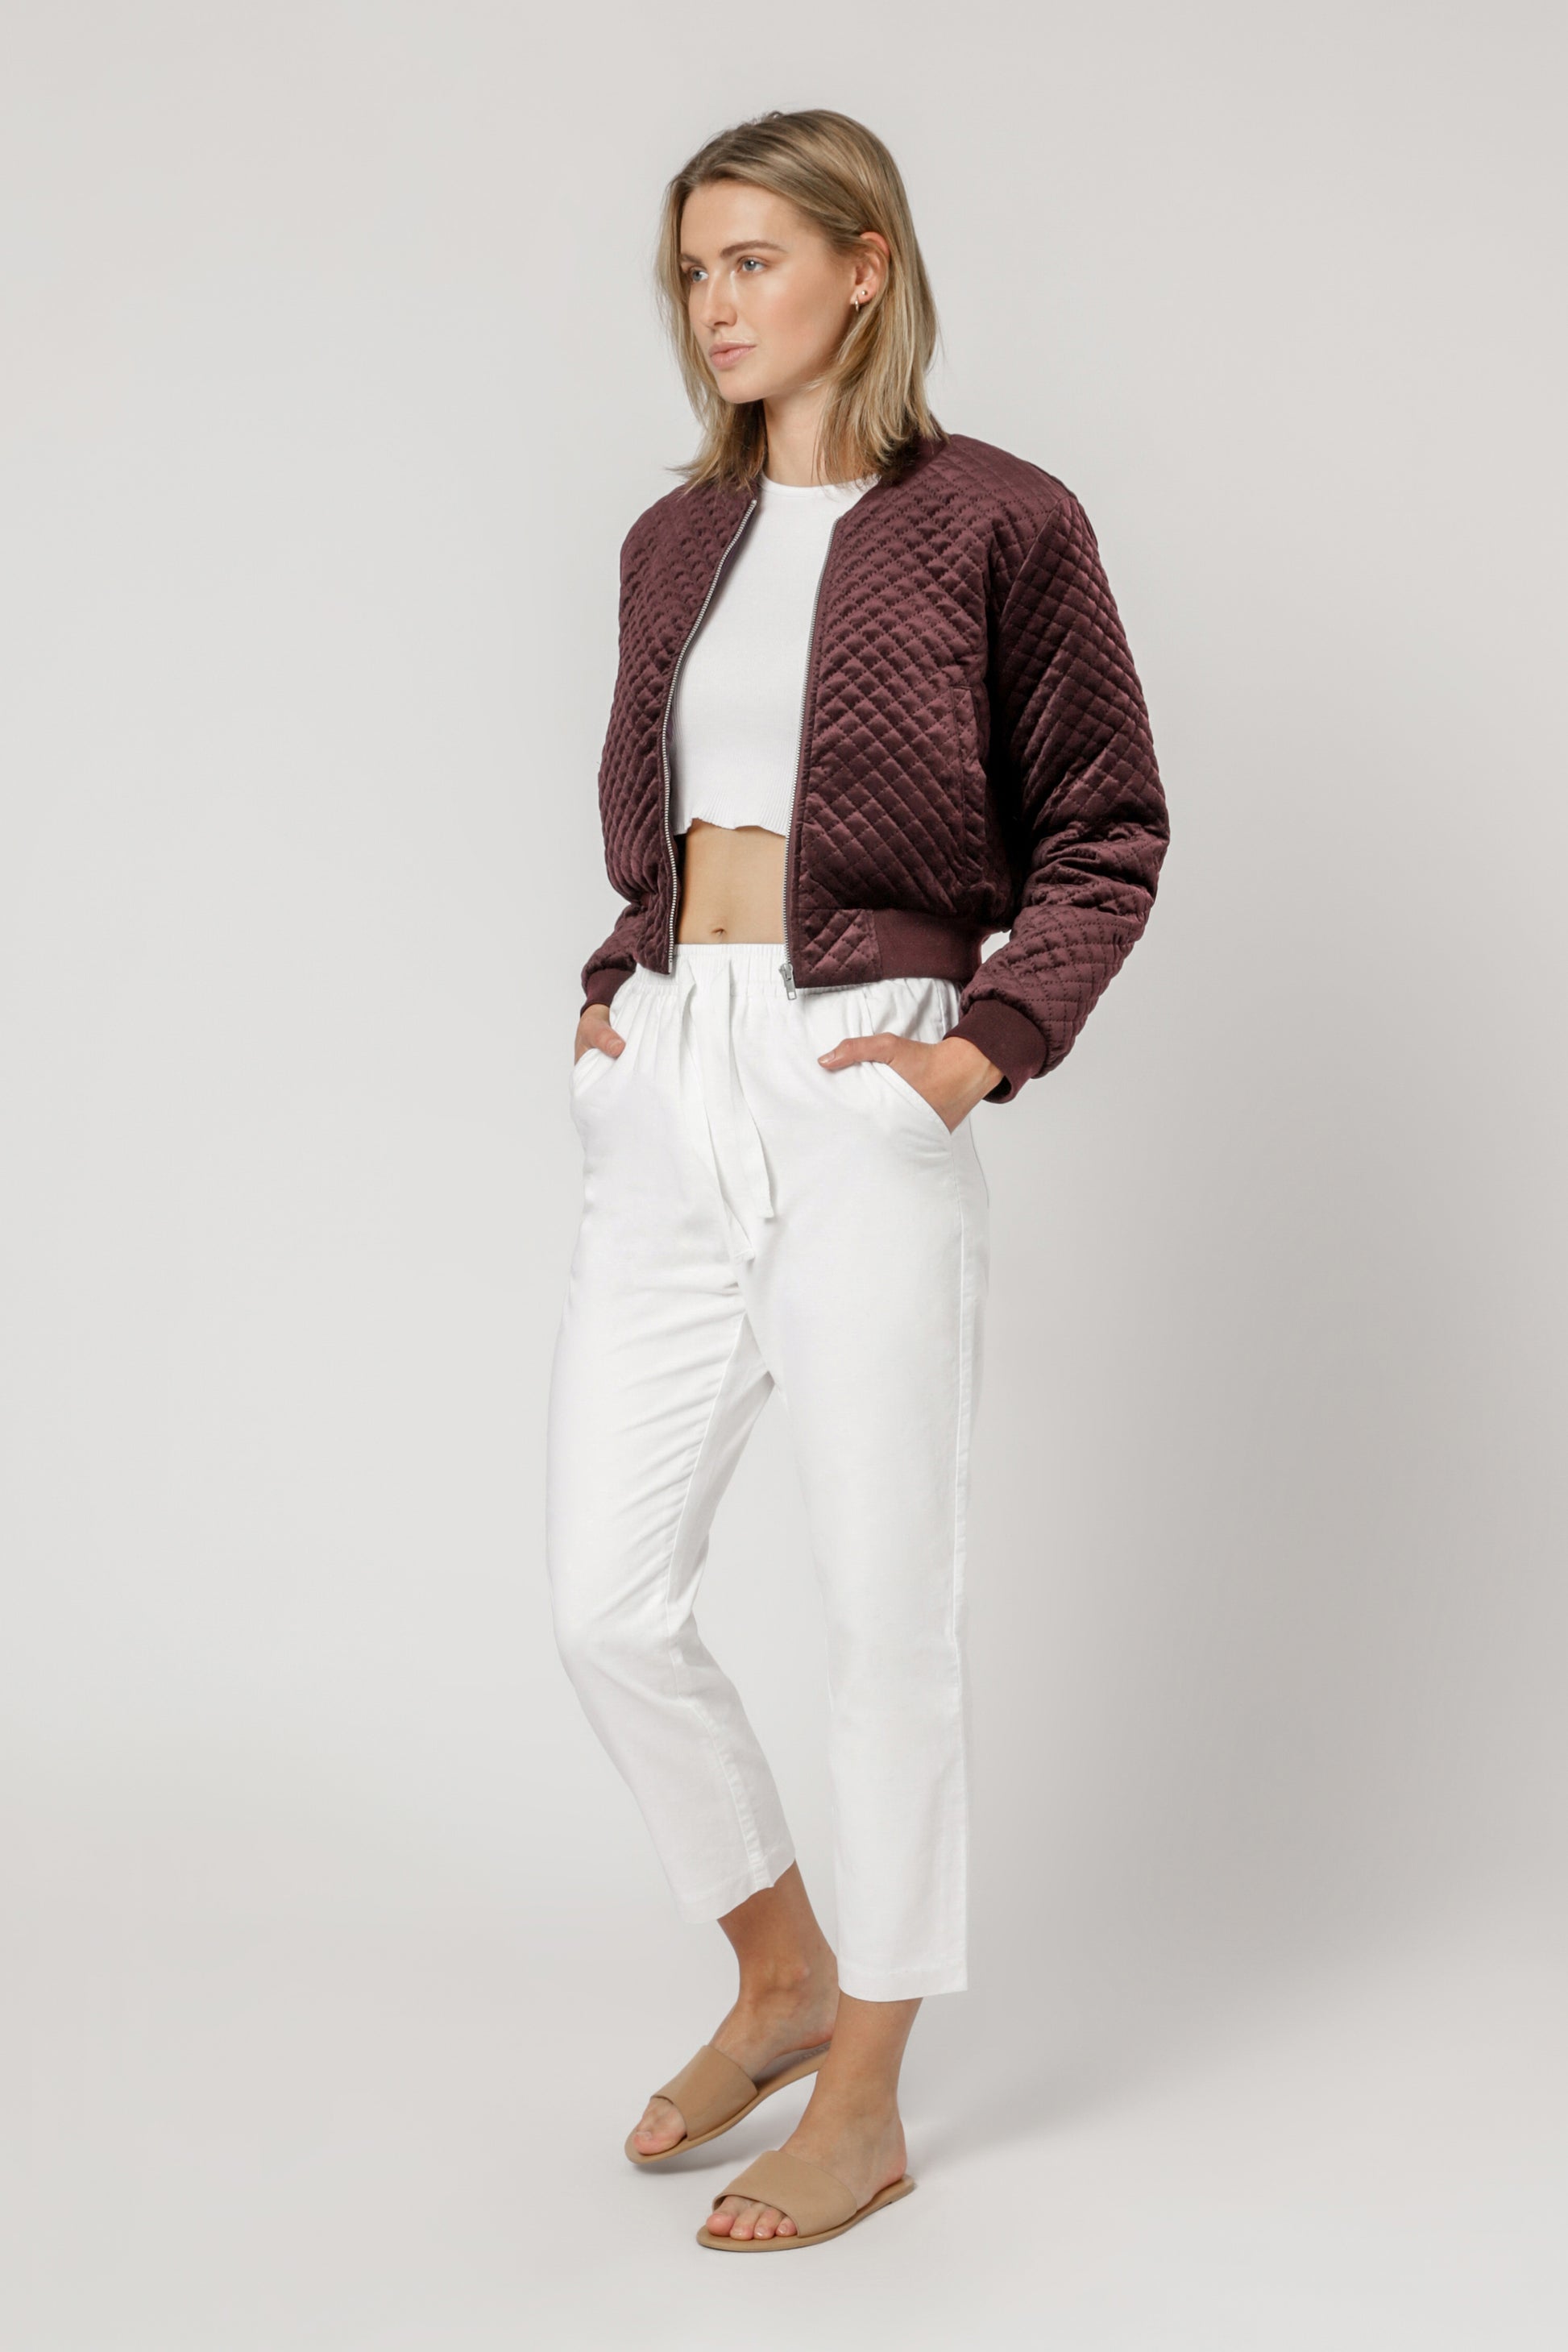 Nude Lucy New Frankie Bomber Berry Jackets 